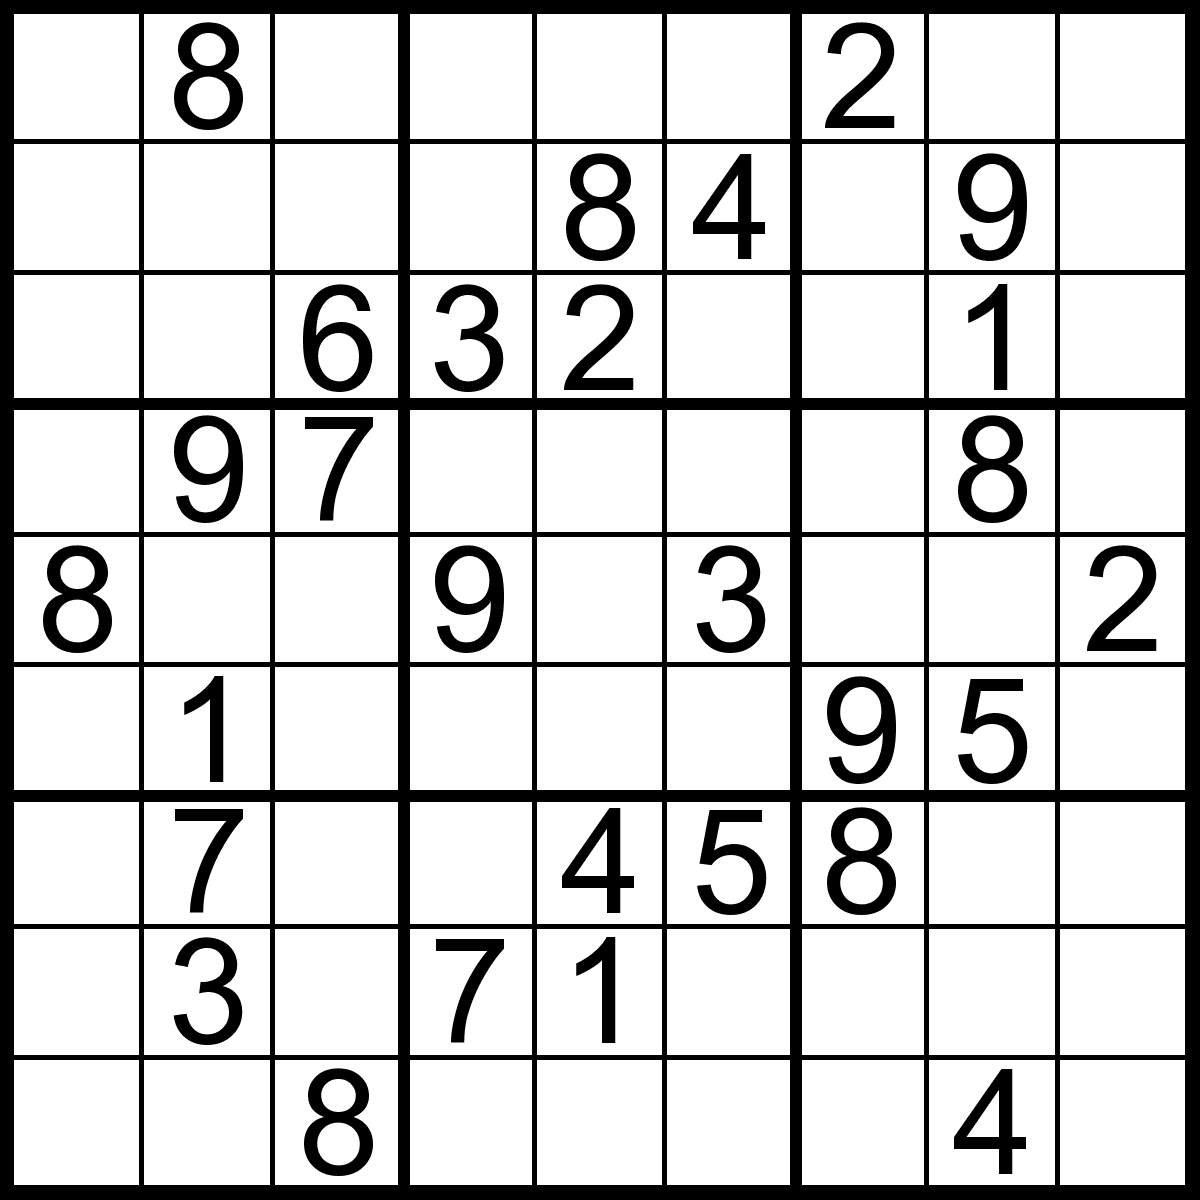 5-best-images-of-easy-6x6-sudoku-printable-puzzles-for-kids-kids-easy